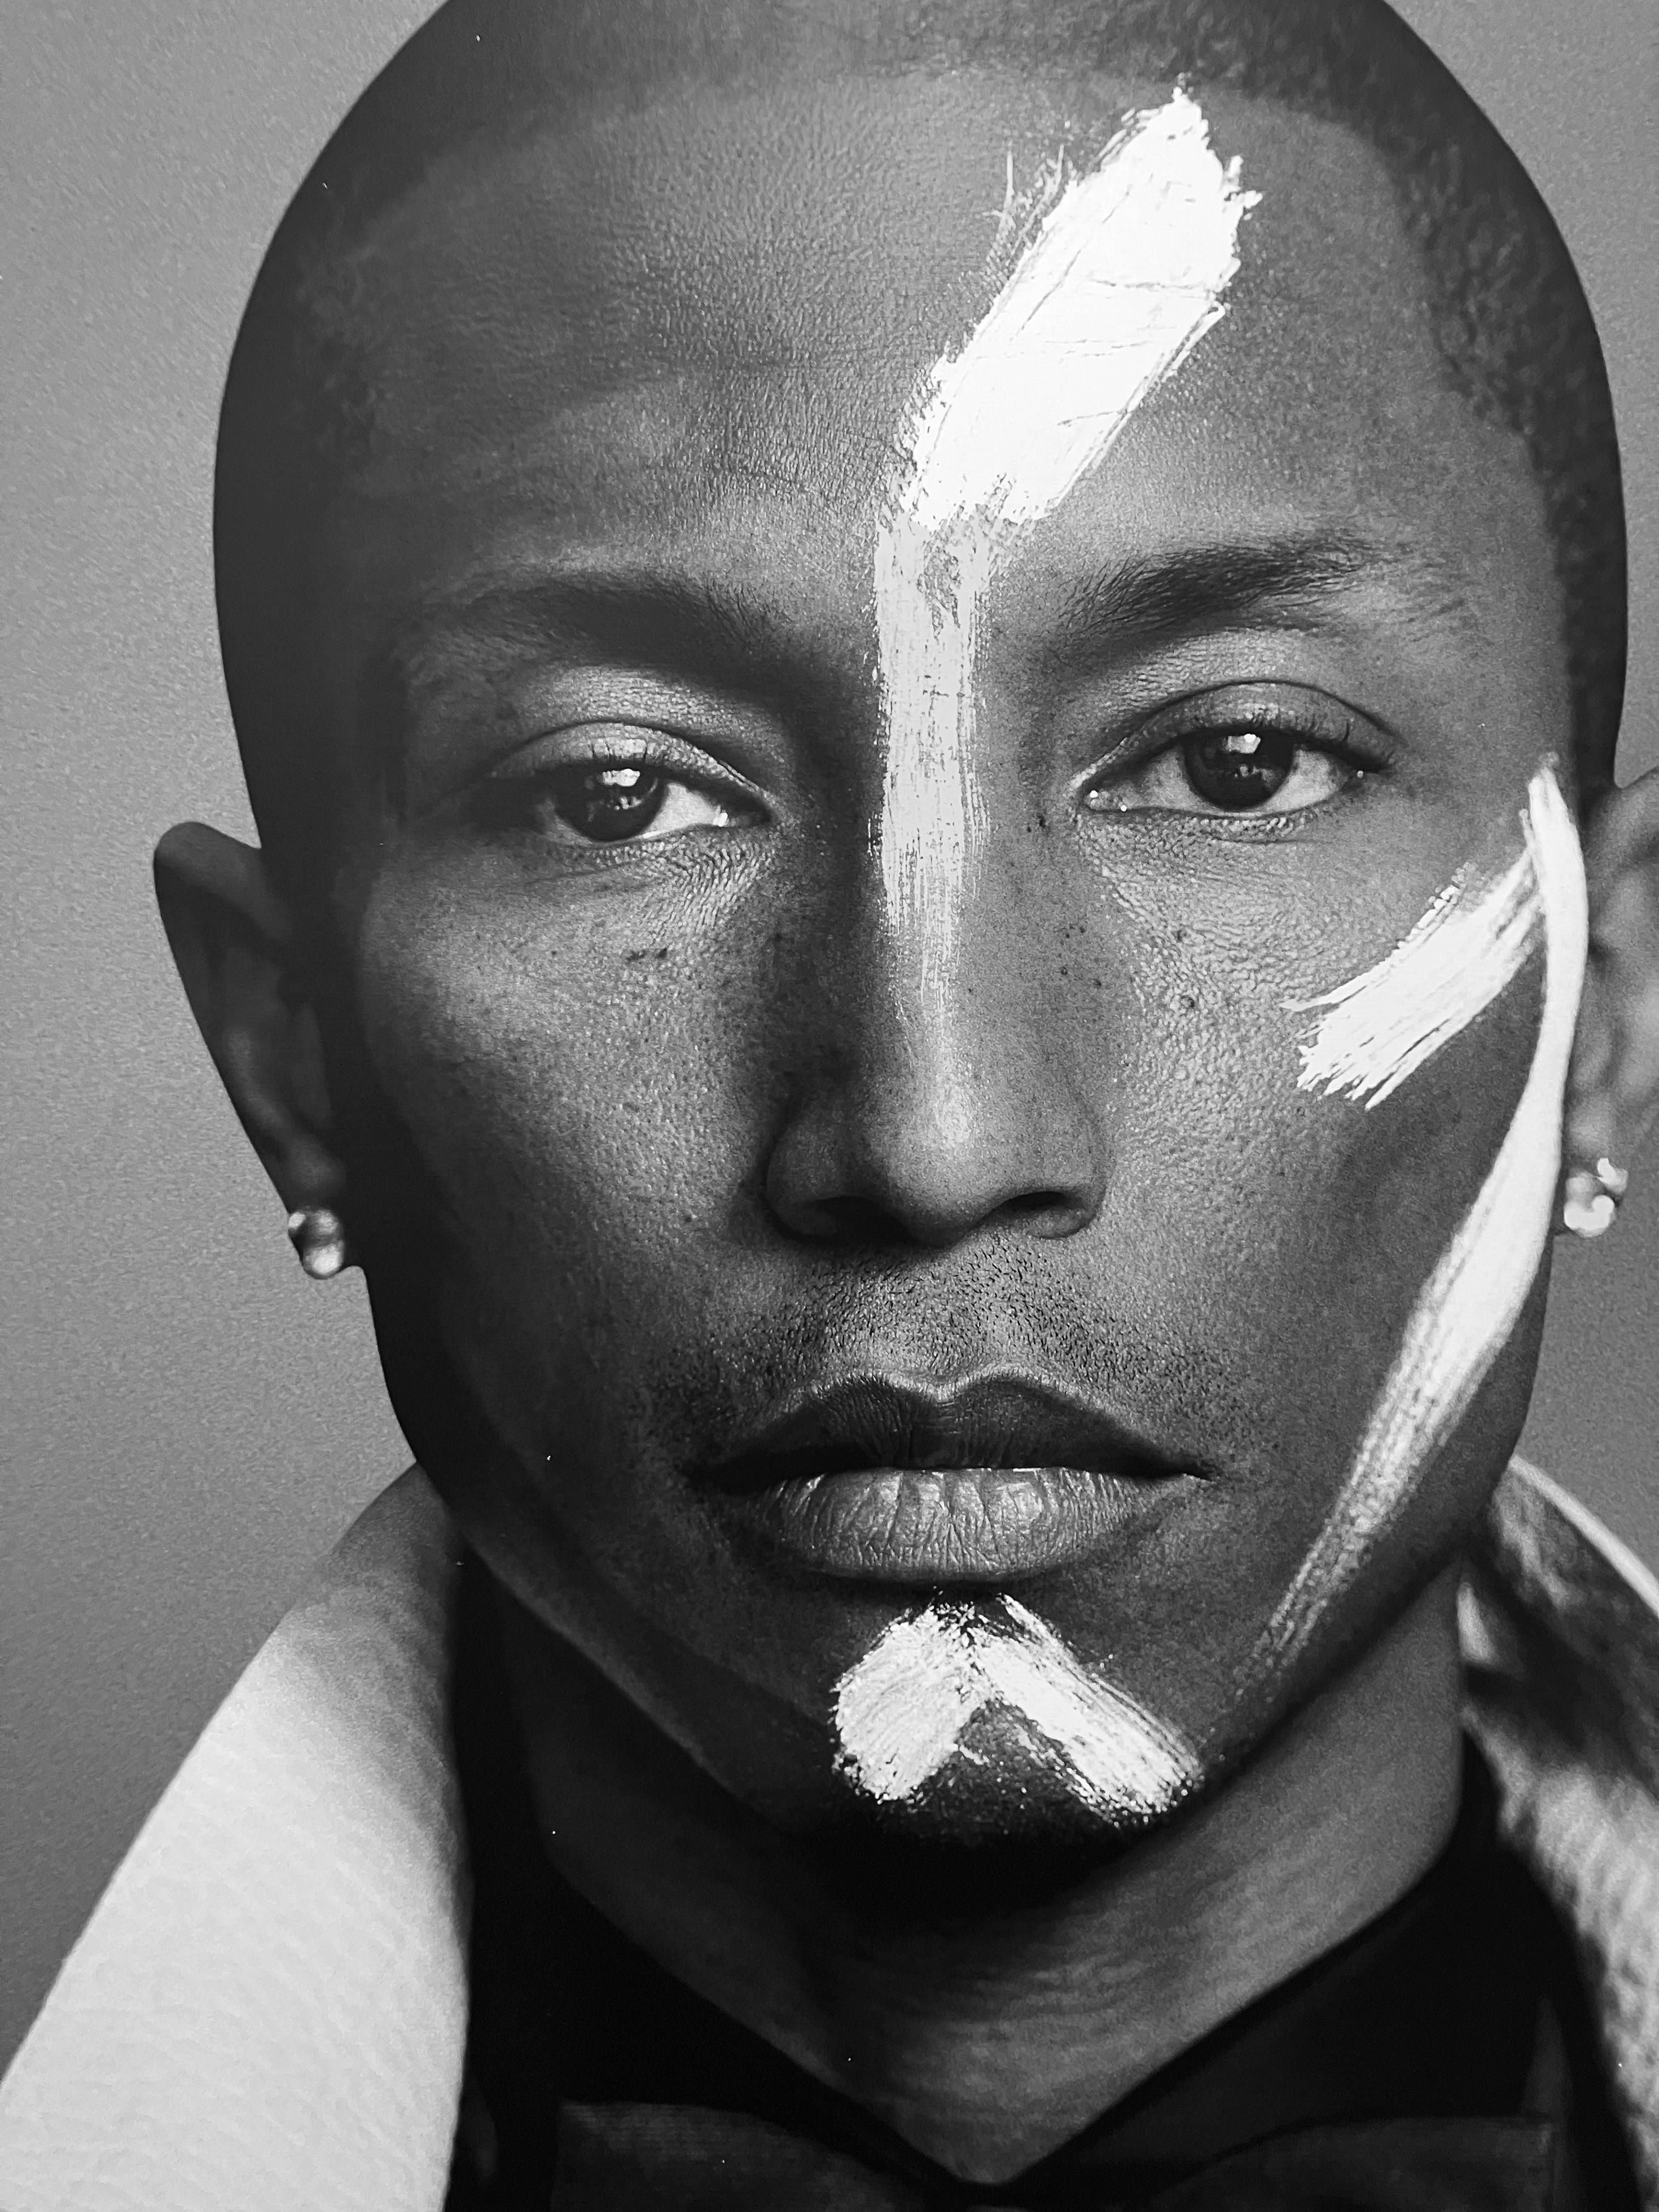 Pharrell Williams Original Portrait, 2017 by Hunter & Gatti
From The series, I will make you a star
Pigment print on canvas. 
Size: 74 H x 52 W in. 

Signed front and signed back 
Mounted on a stretcher

